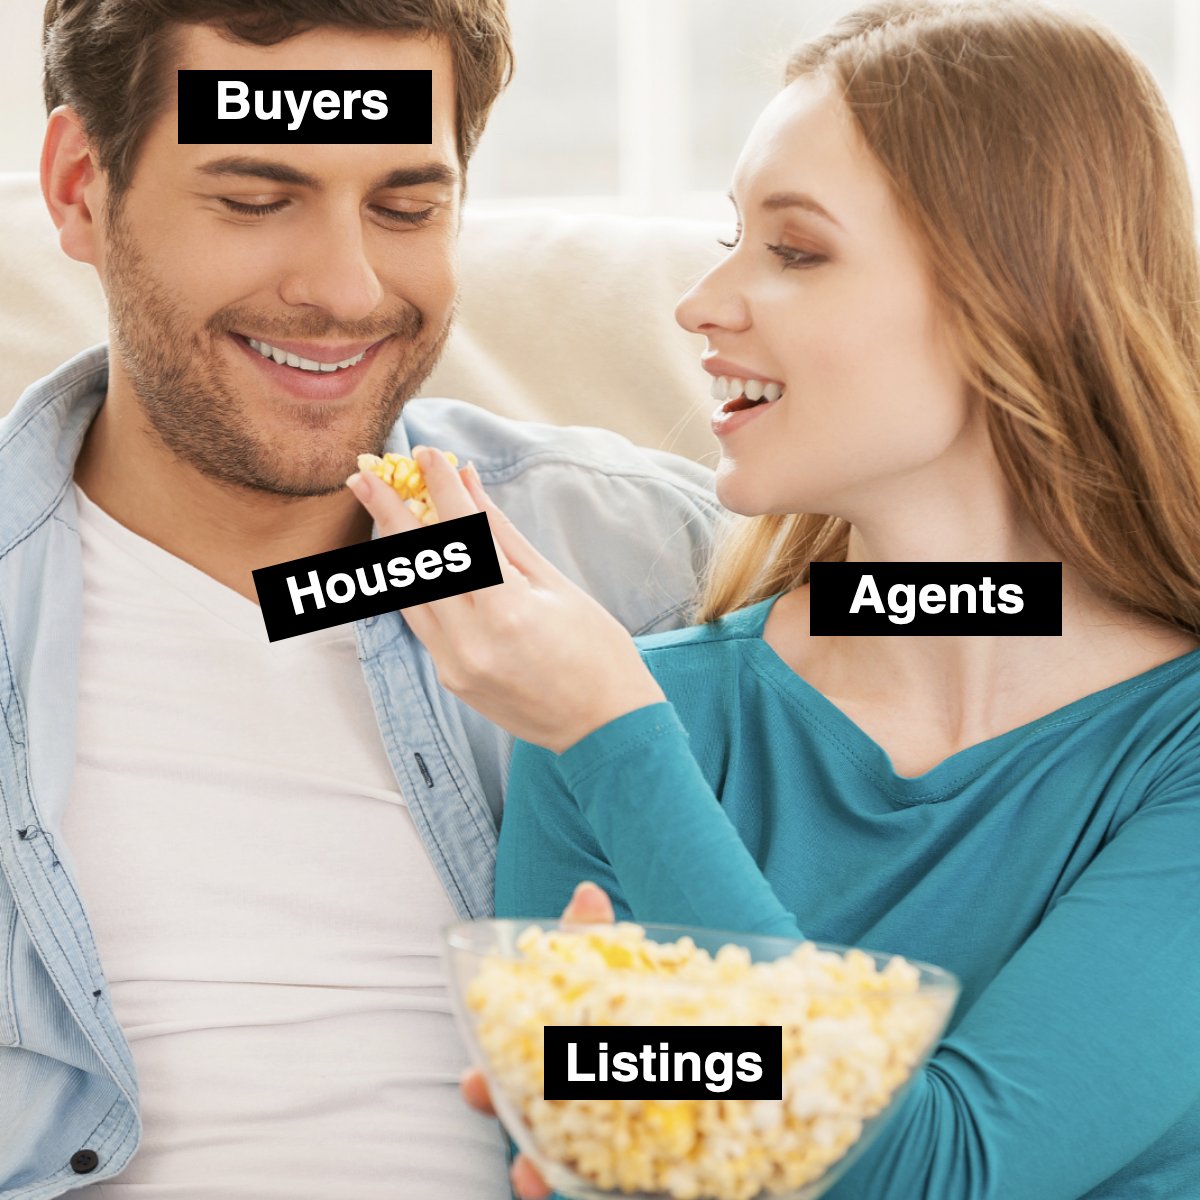 LOL! 😂

#funny #listings #buyers #agents #houses 
 #Annapolis #Fulton #FortMeade #realestate #realtor #homevaluation #pcs #homevalues #LoweryHomeTeam